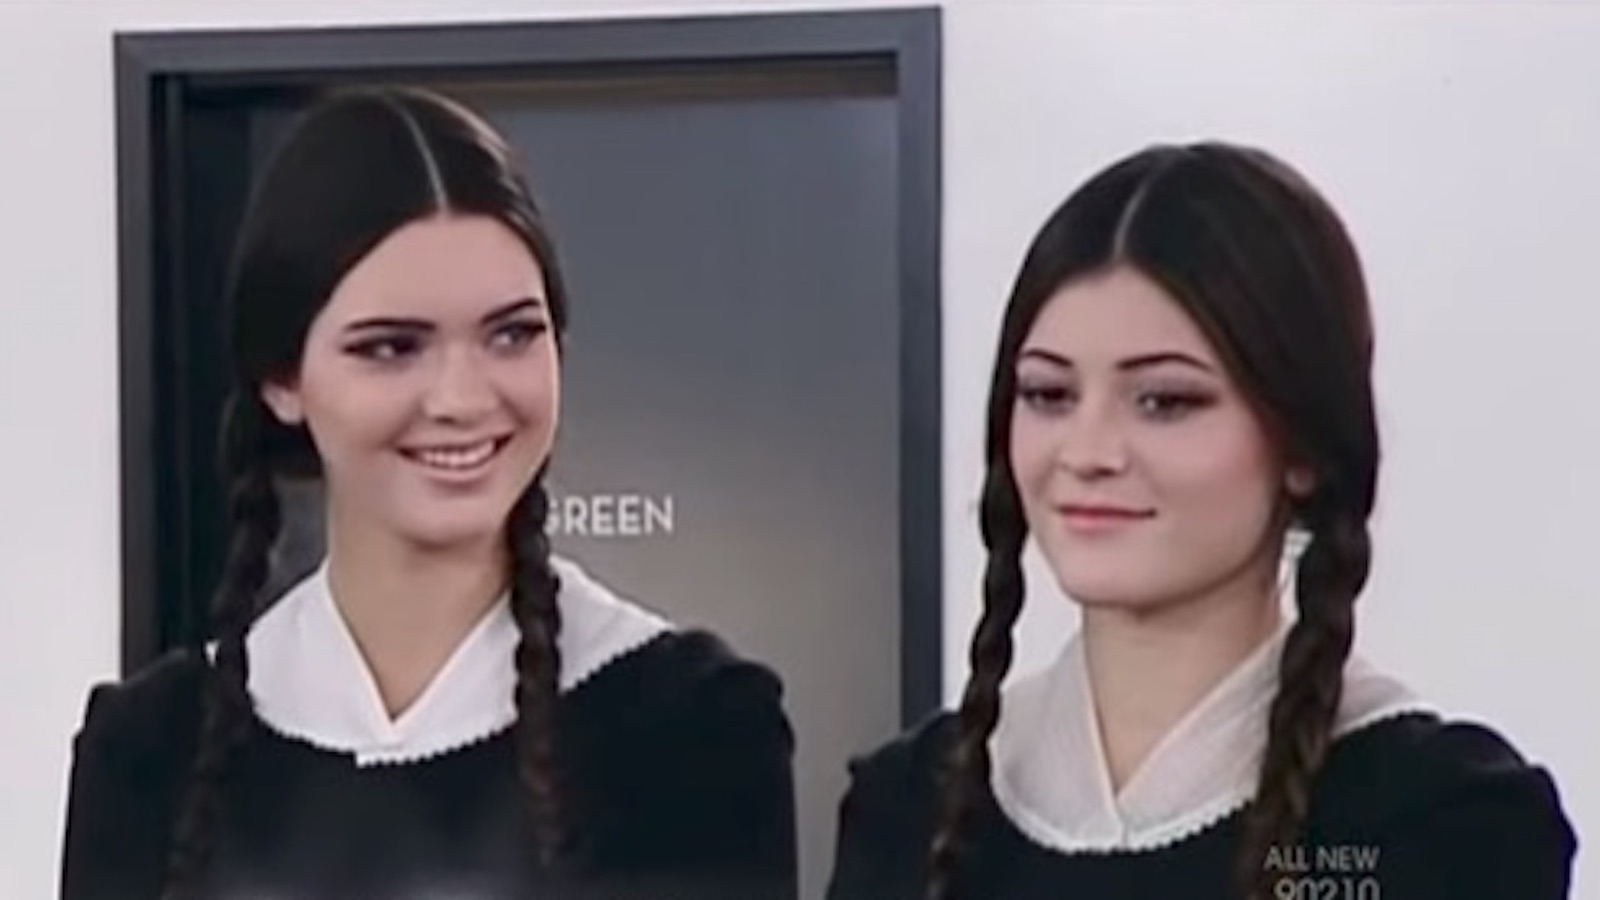 kendall jenner and kylie jenner americas next top model